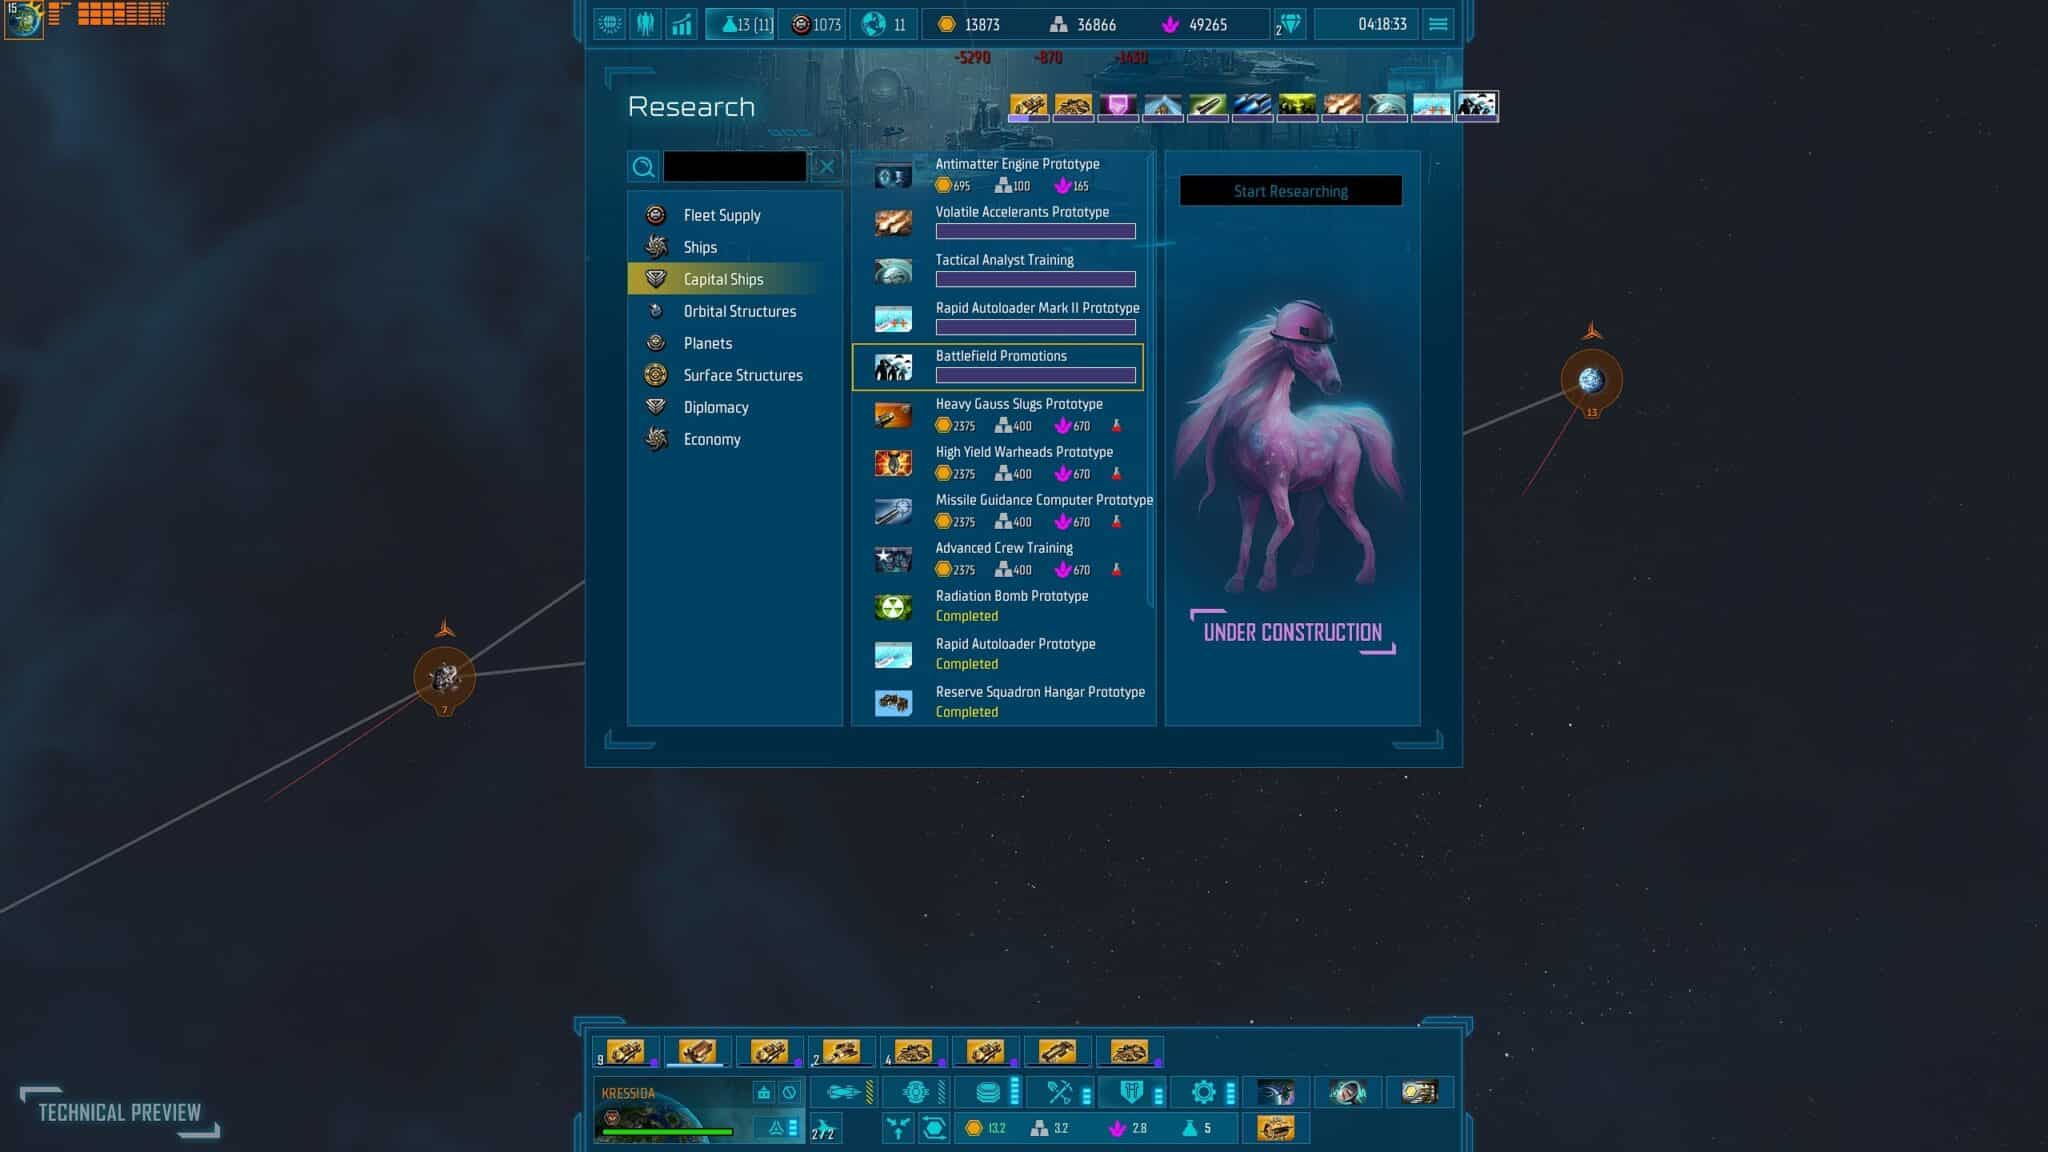 (The research is not particularly exciting yet. When you have the resources, click on an entry. There is no deck system like in Stellaris or a research tree.)